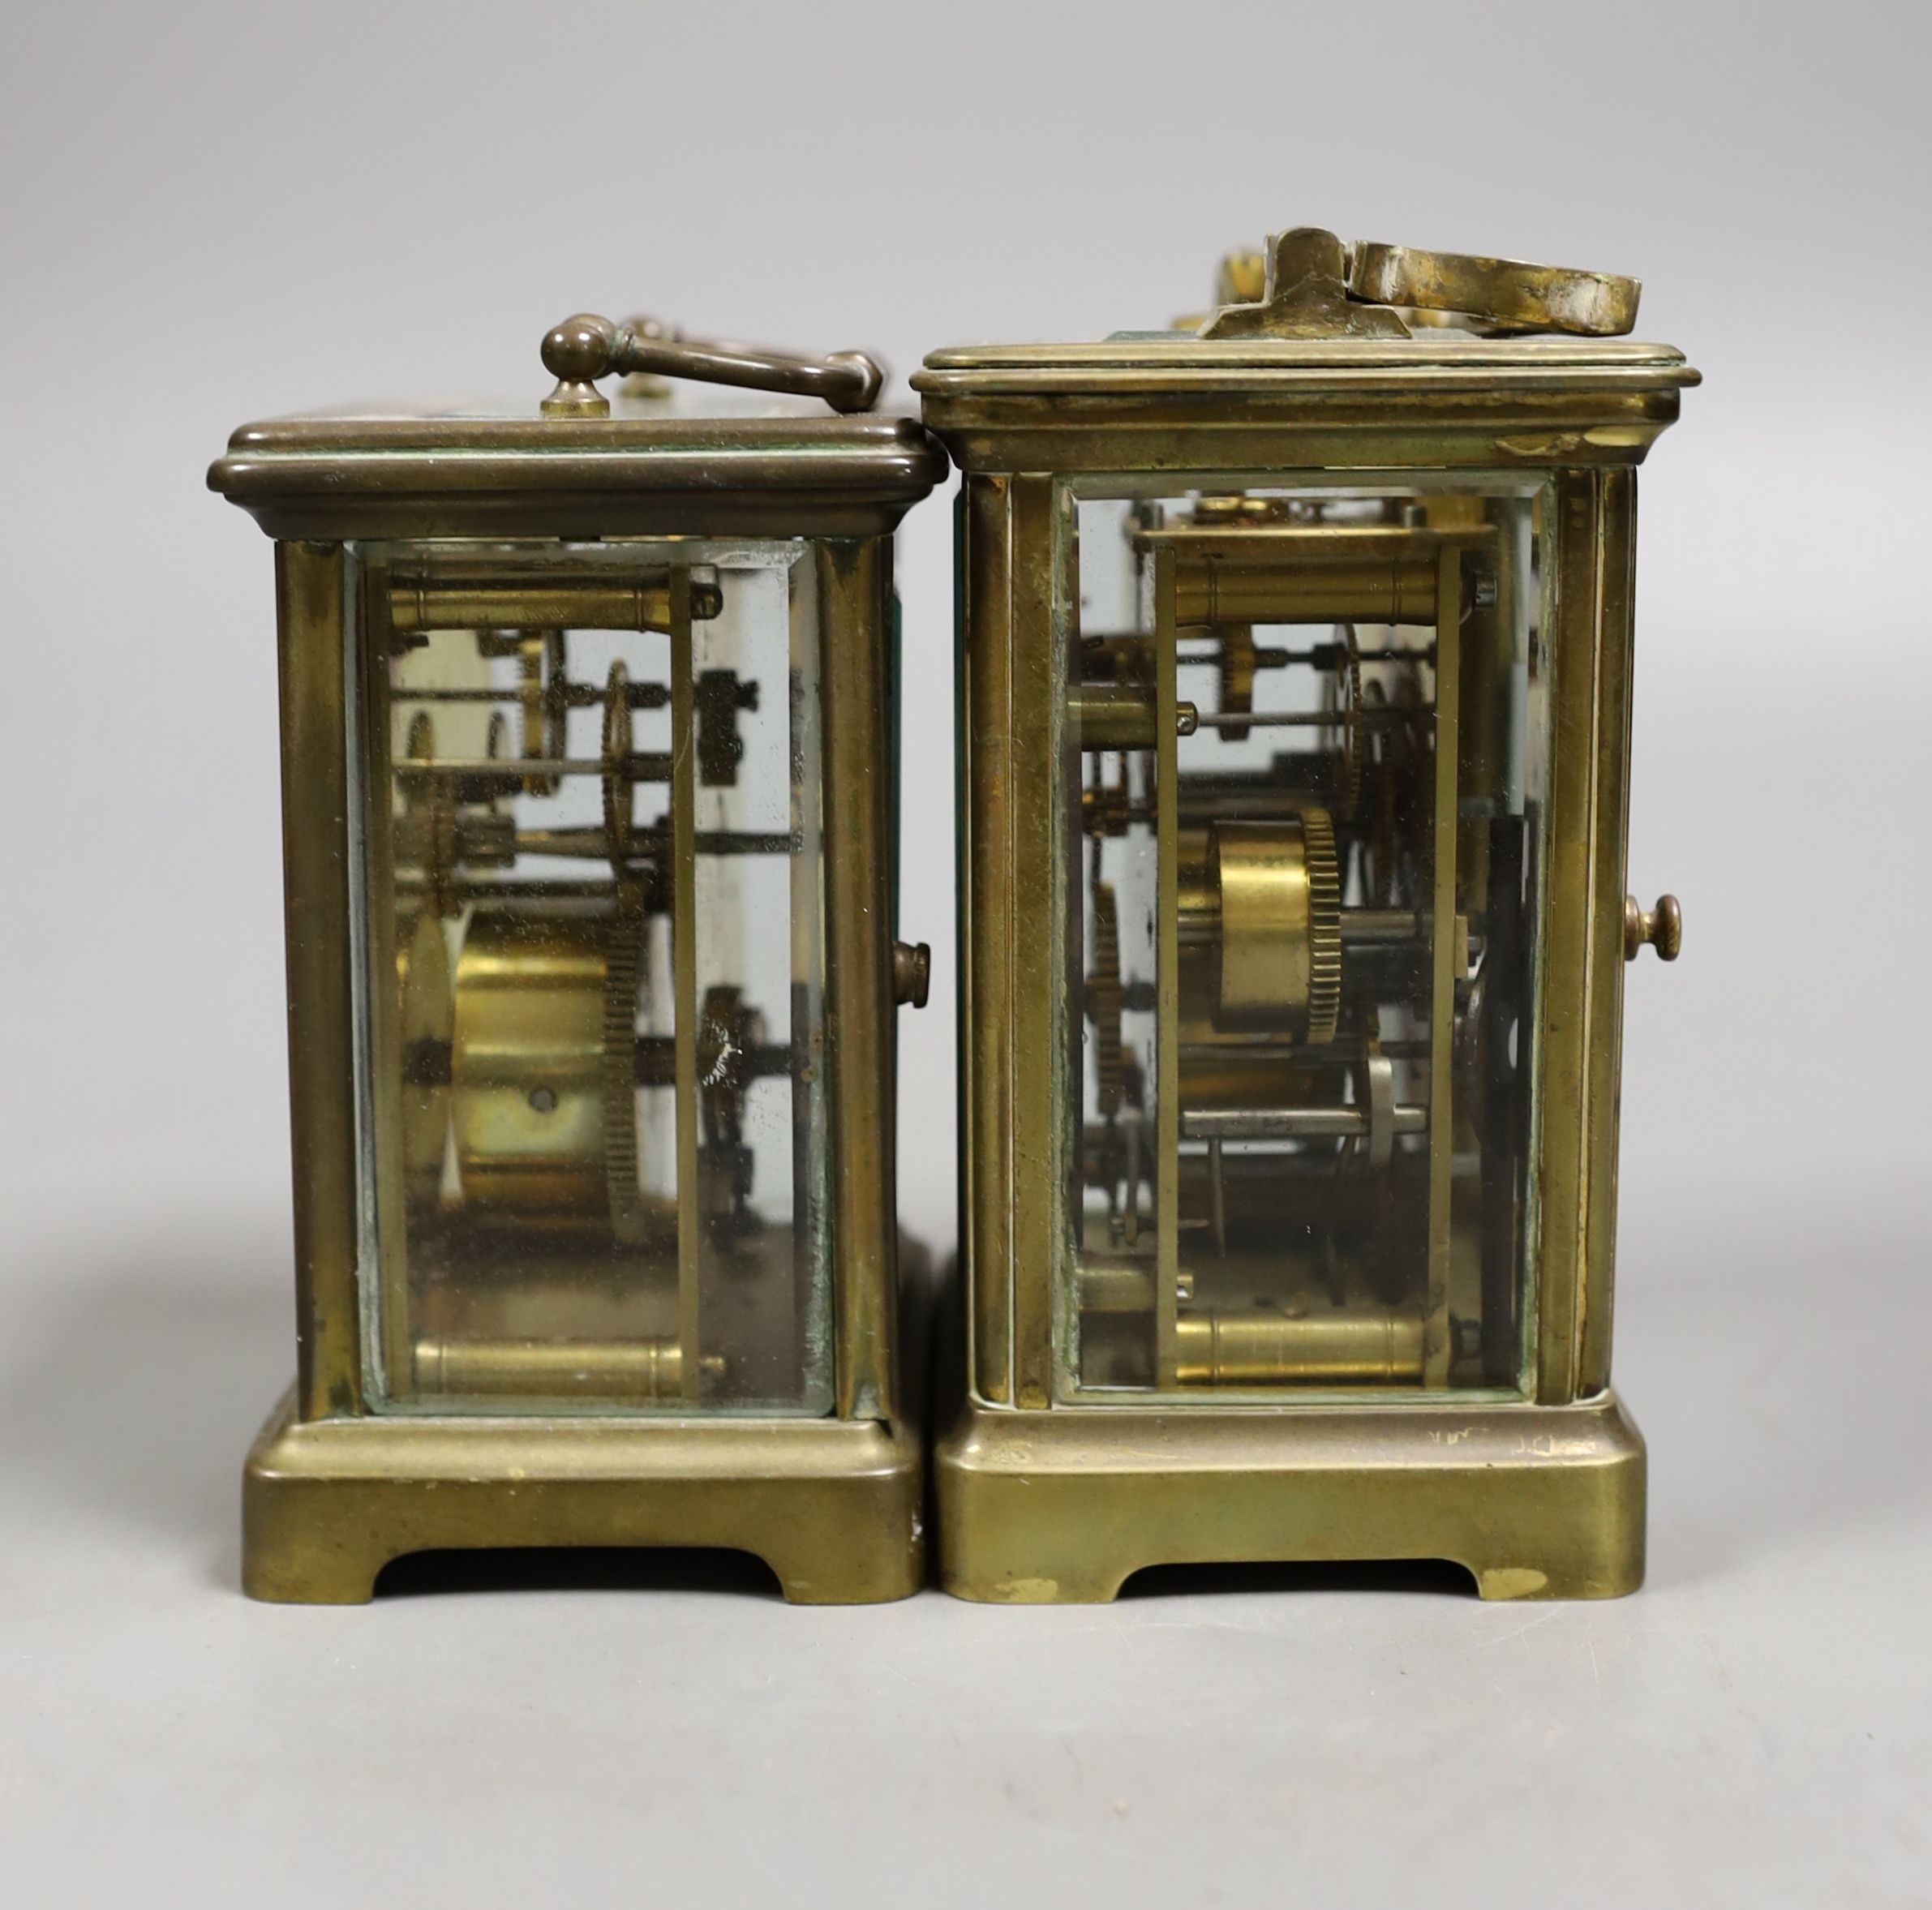 A French brass carriage timepiece with alarm and a French brass carriage timepiece, Tallest 11.5 cms high.